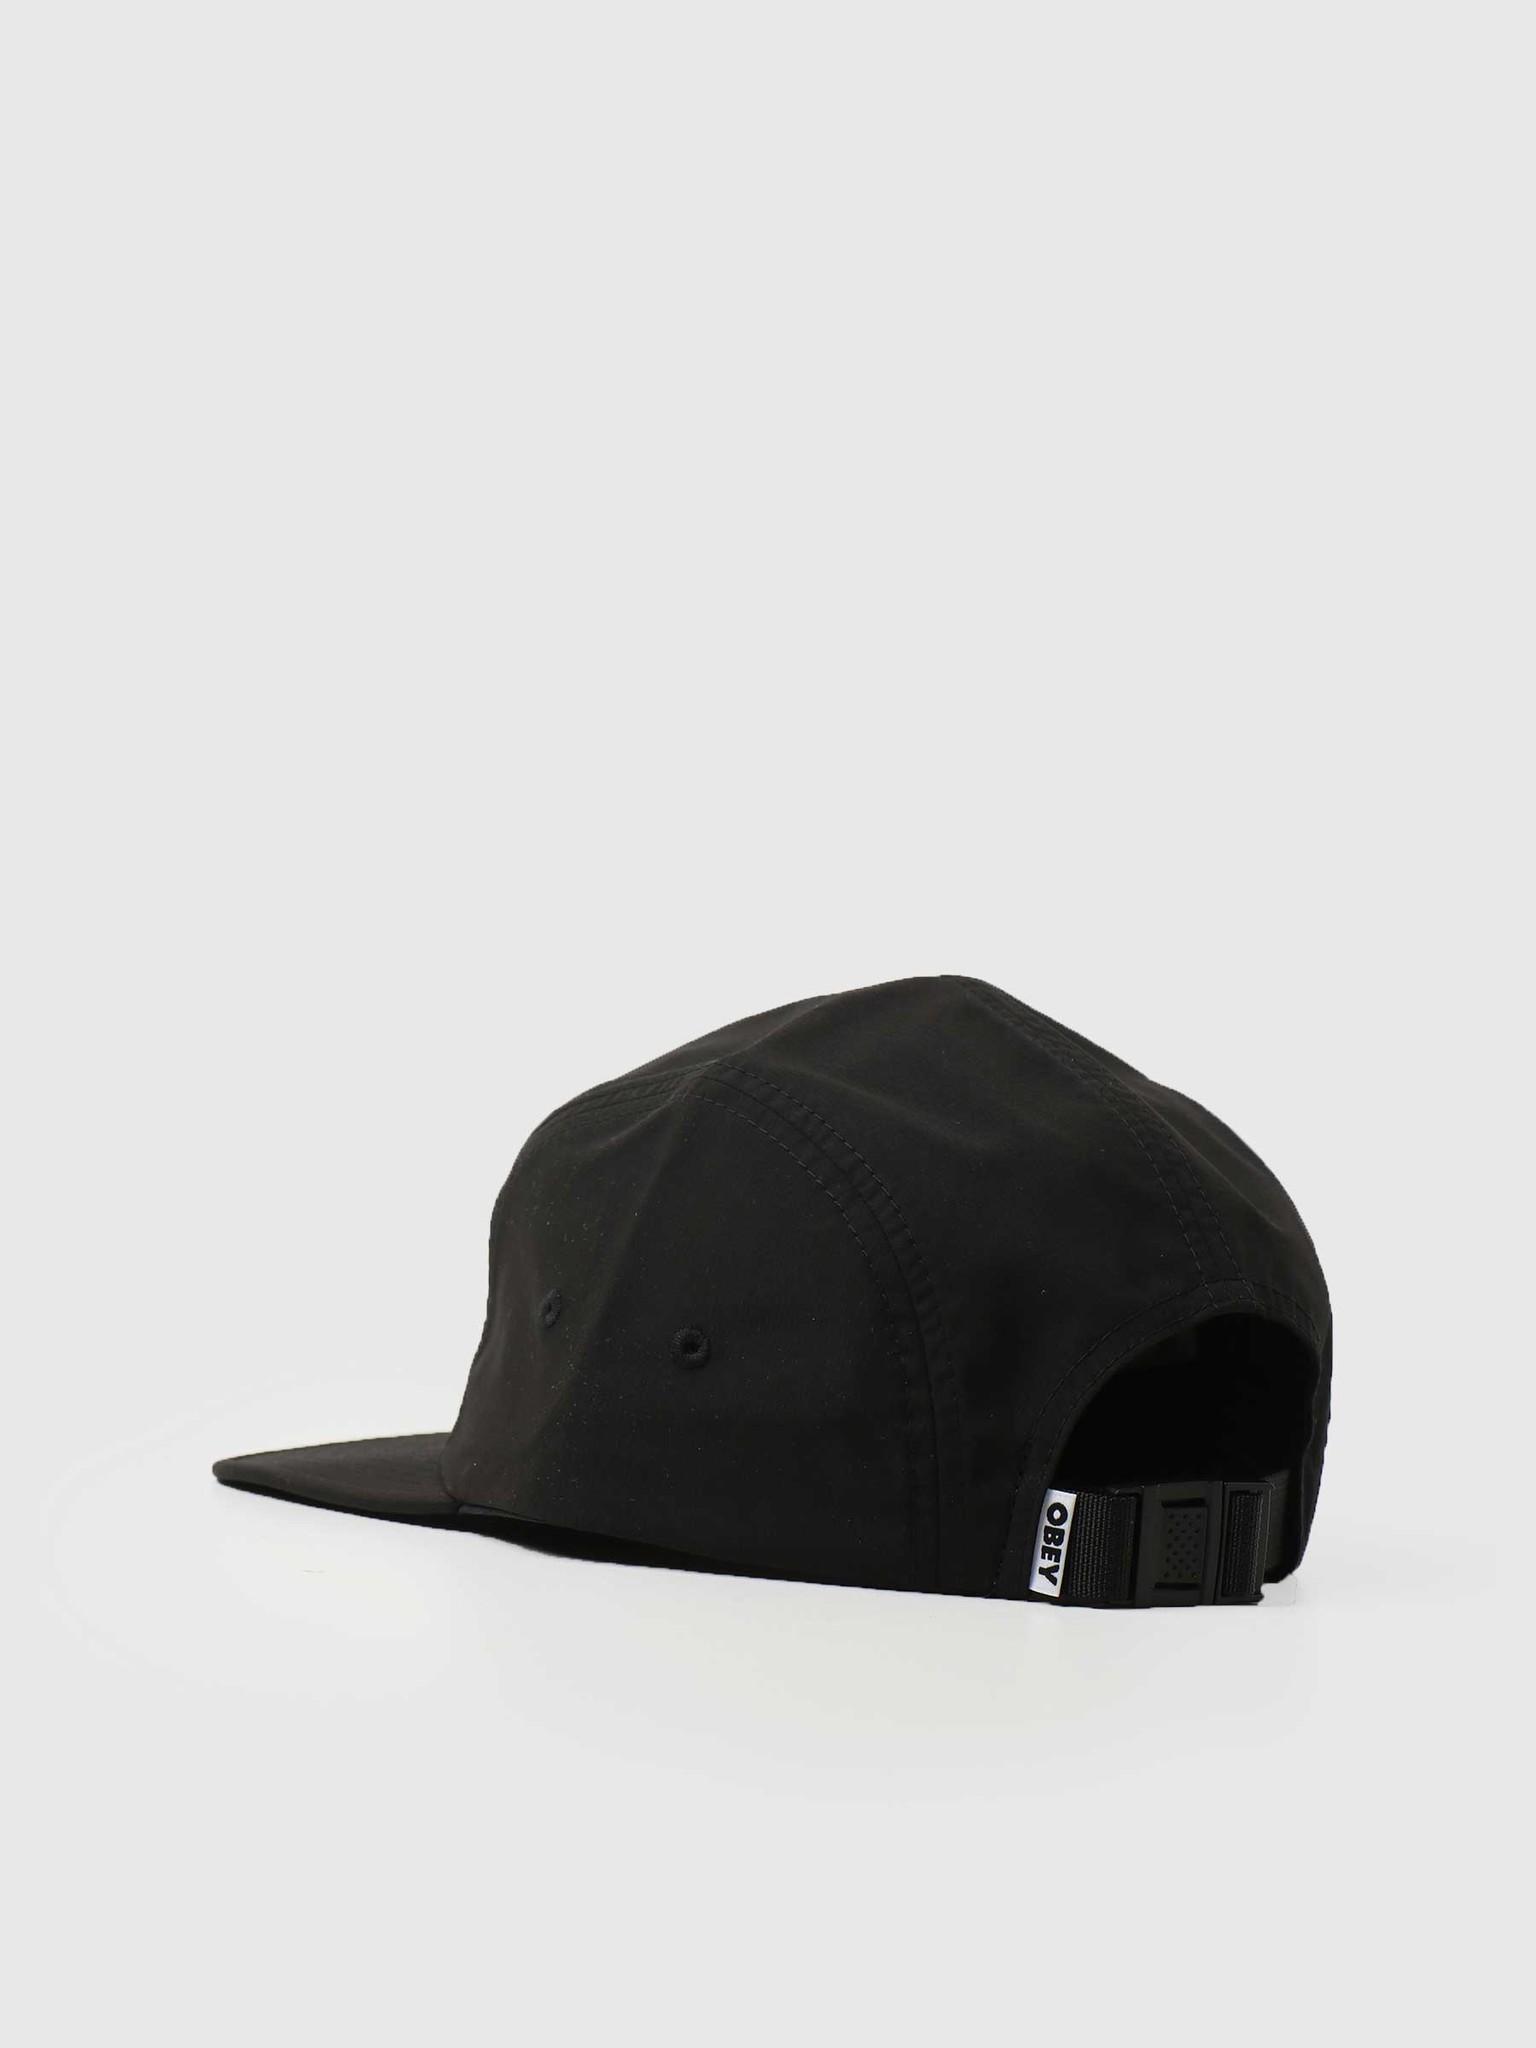 Bold Ripstop Camp Hat 5 Panel Hat (Or Camp) Black 100490075